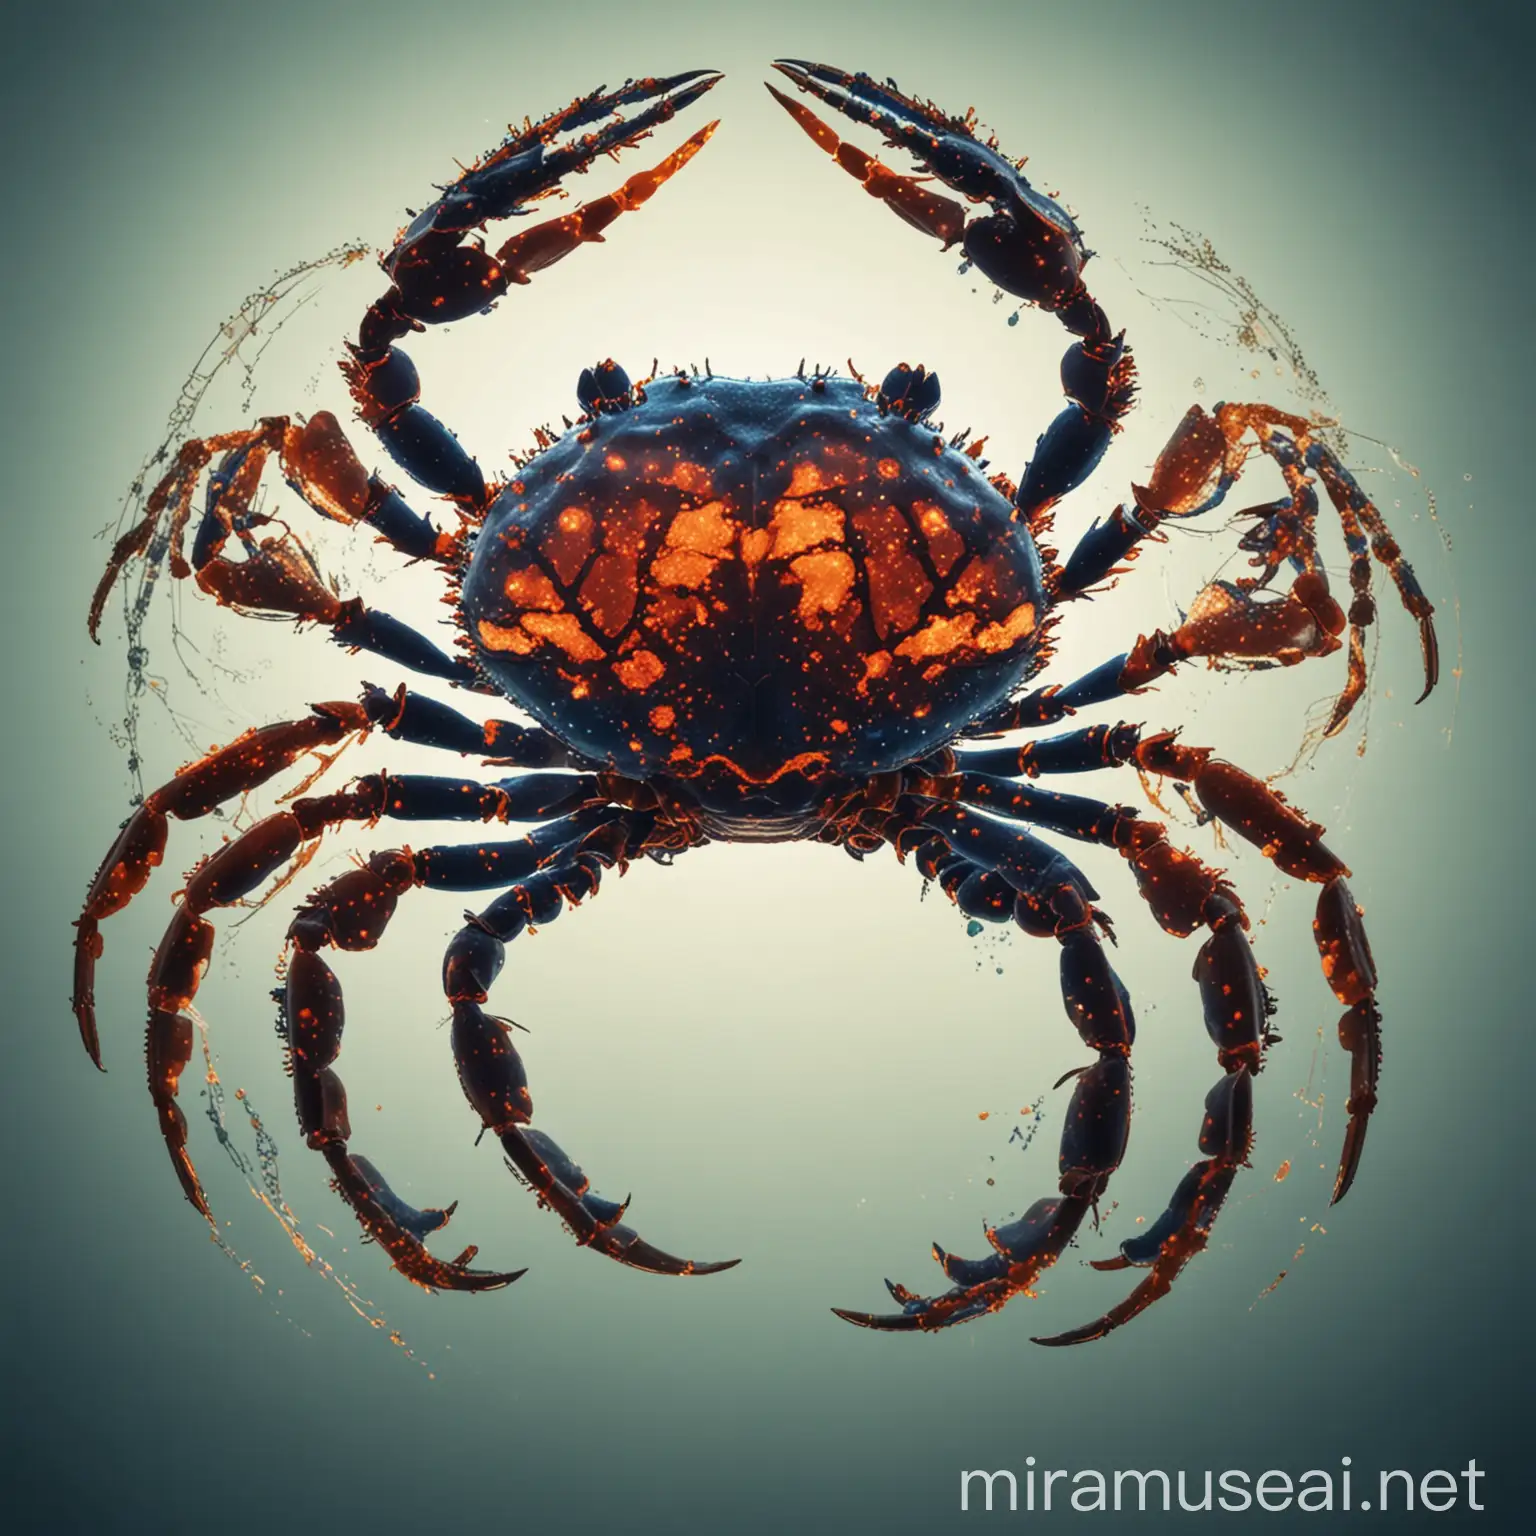 Genomics, antibodies, antibody drug conjugates, cell therapy, immunotherapy, personalized medicine in a double exposure in a crab silhouette 